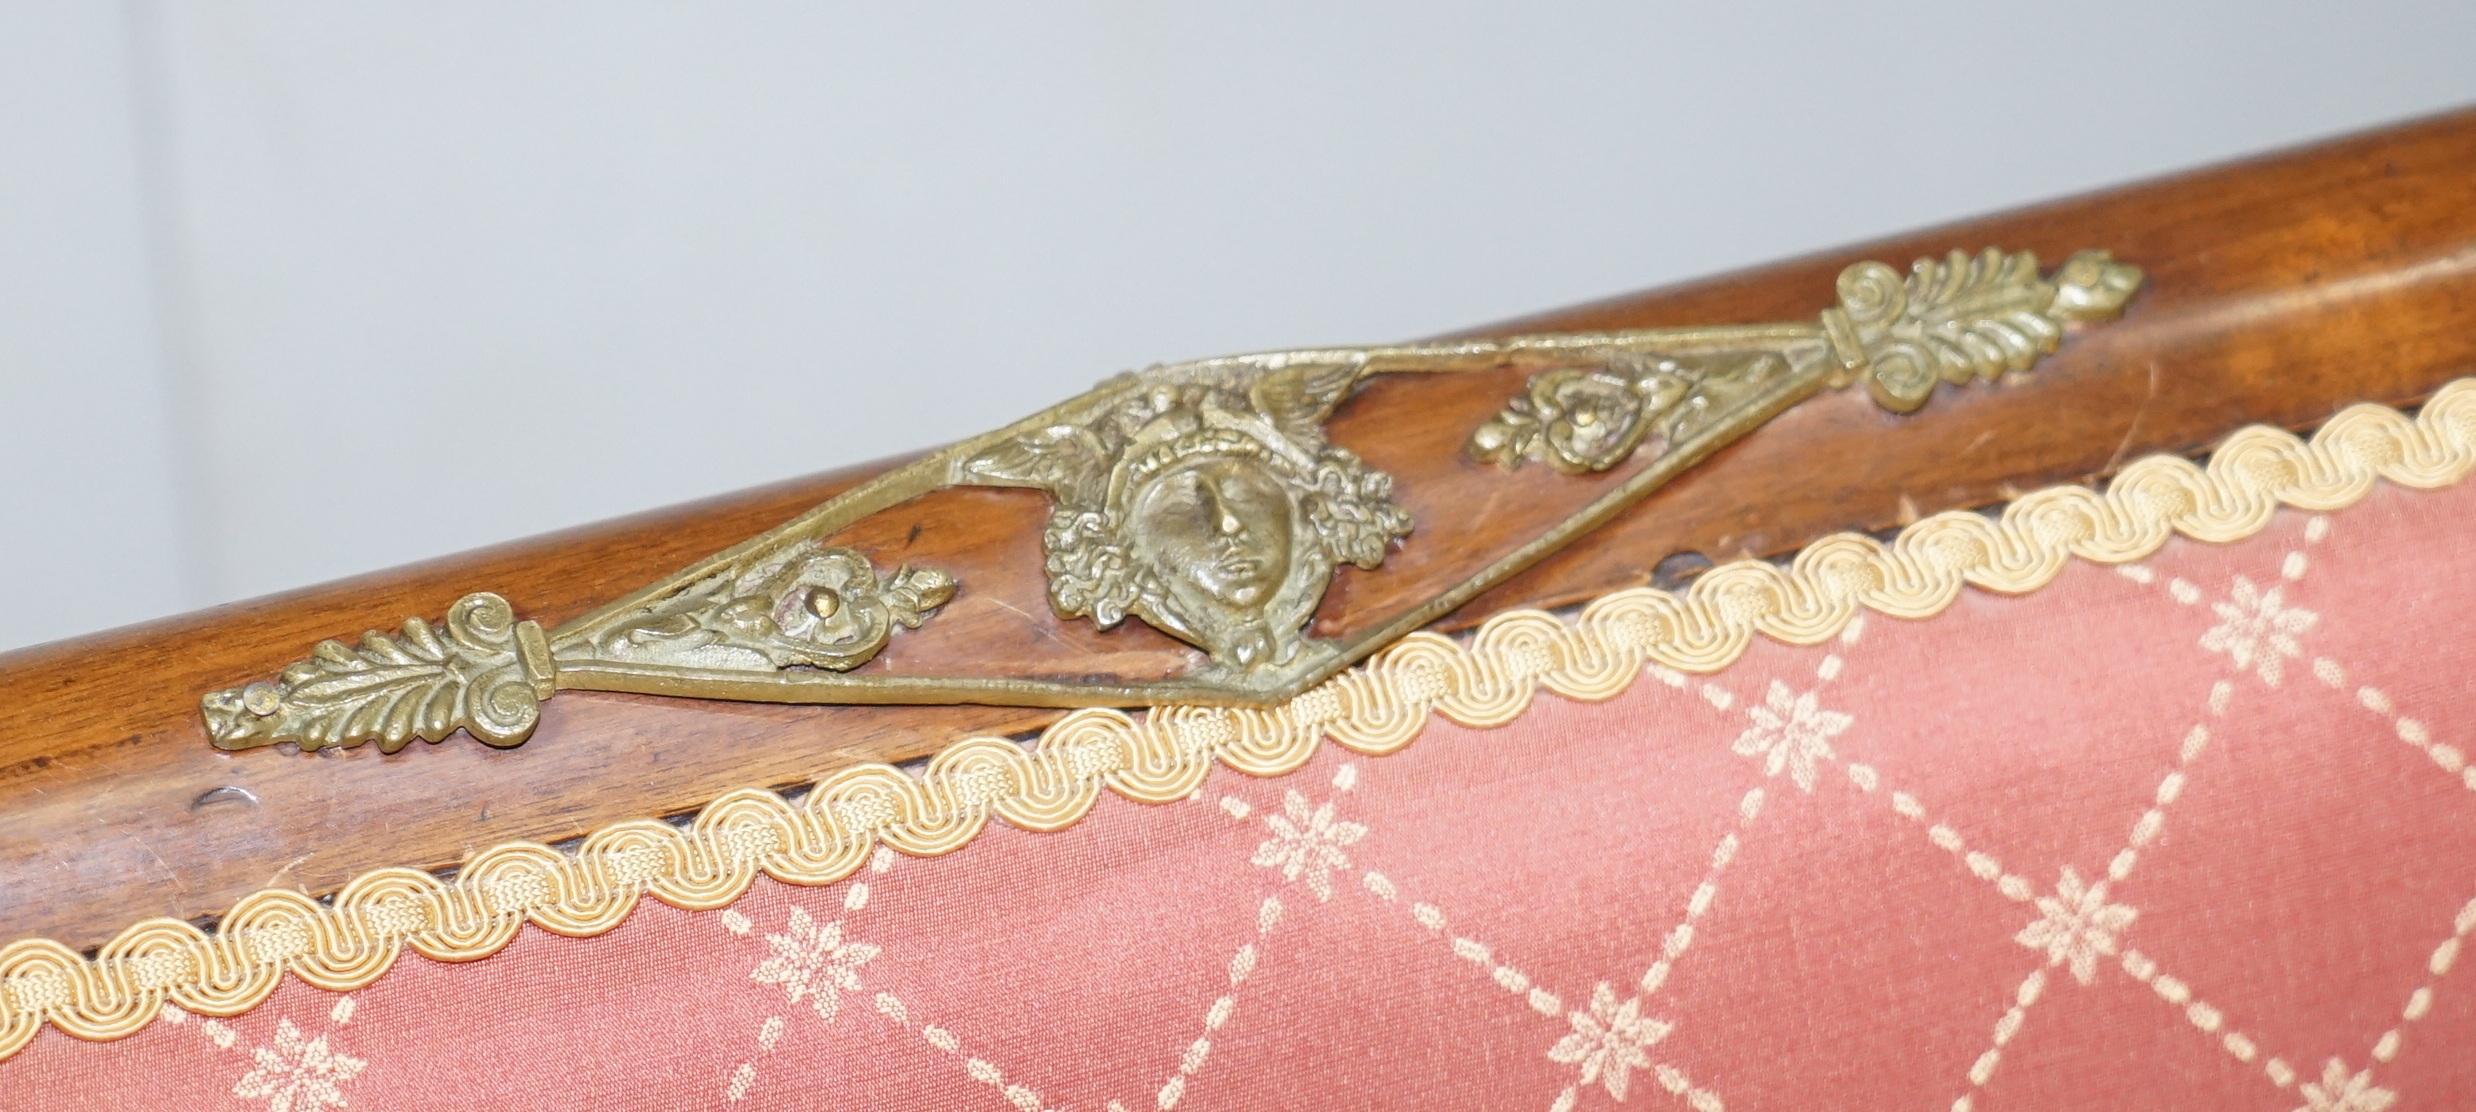 19th Century French Empire Ormolu Sphinx Egyptian Hardwood Suite Sofa Armchairs For Sale 1